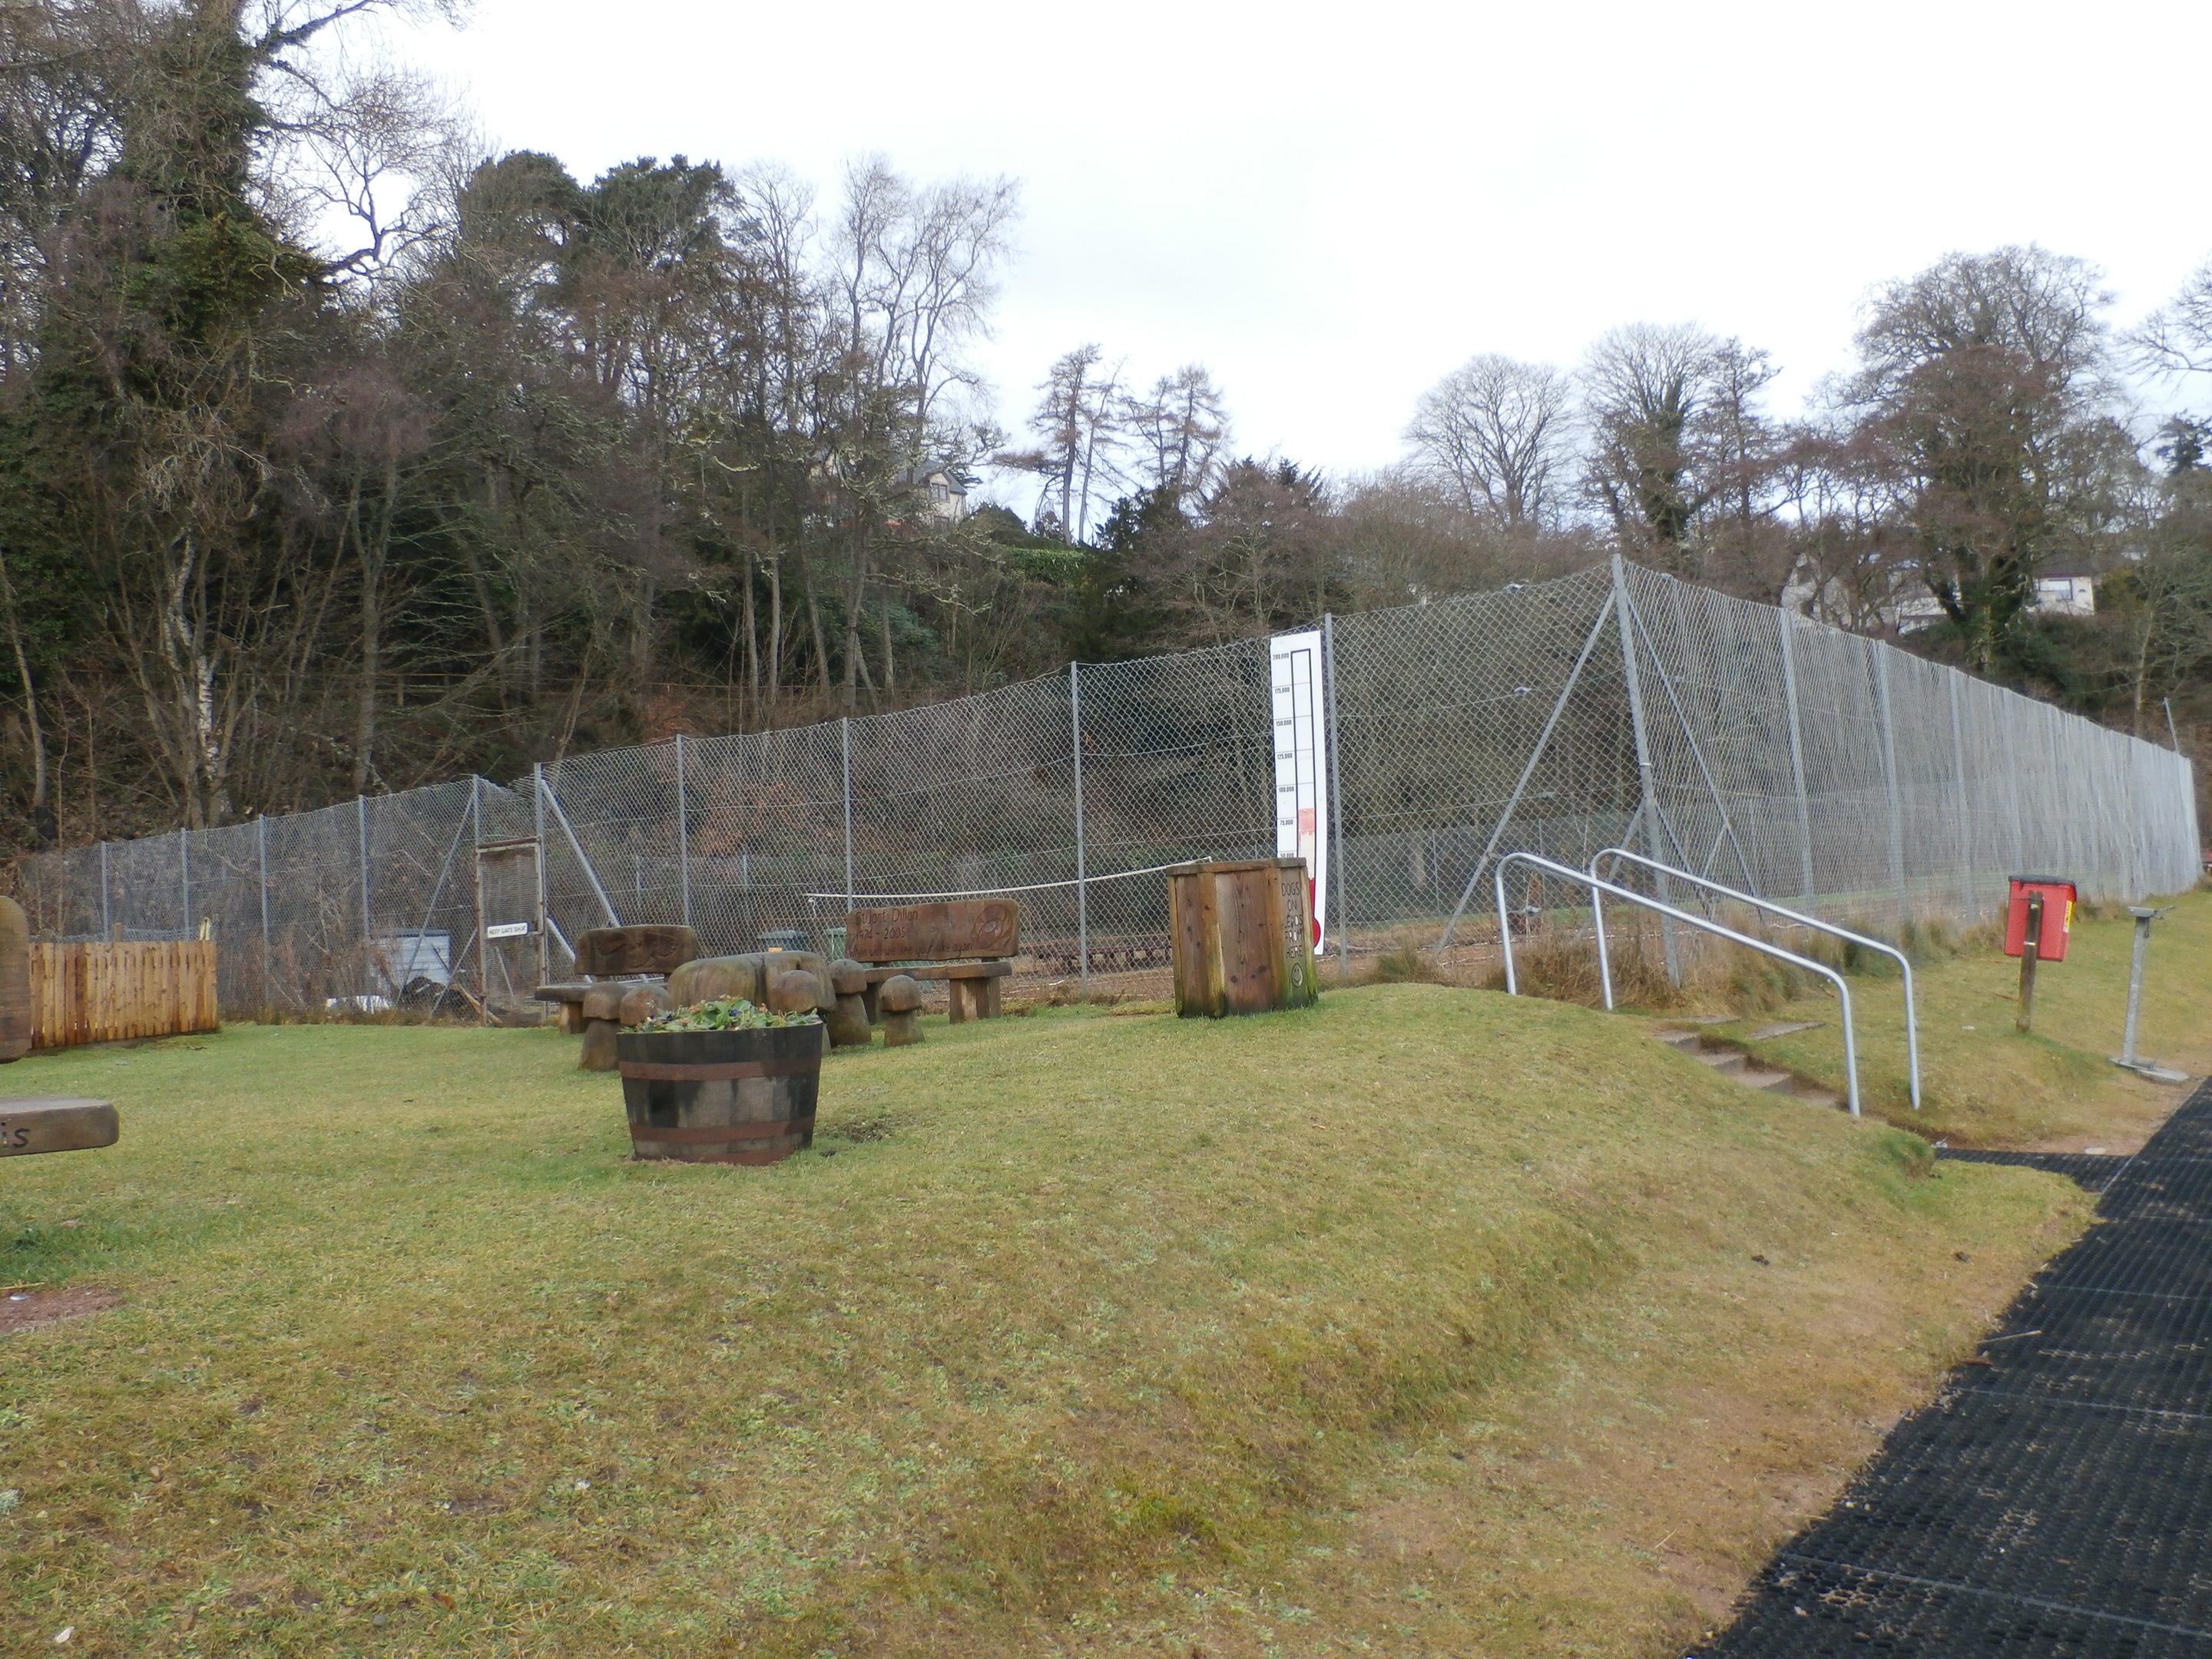 The tennis courts in Rosemarkie are set to be redeveloped